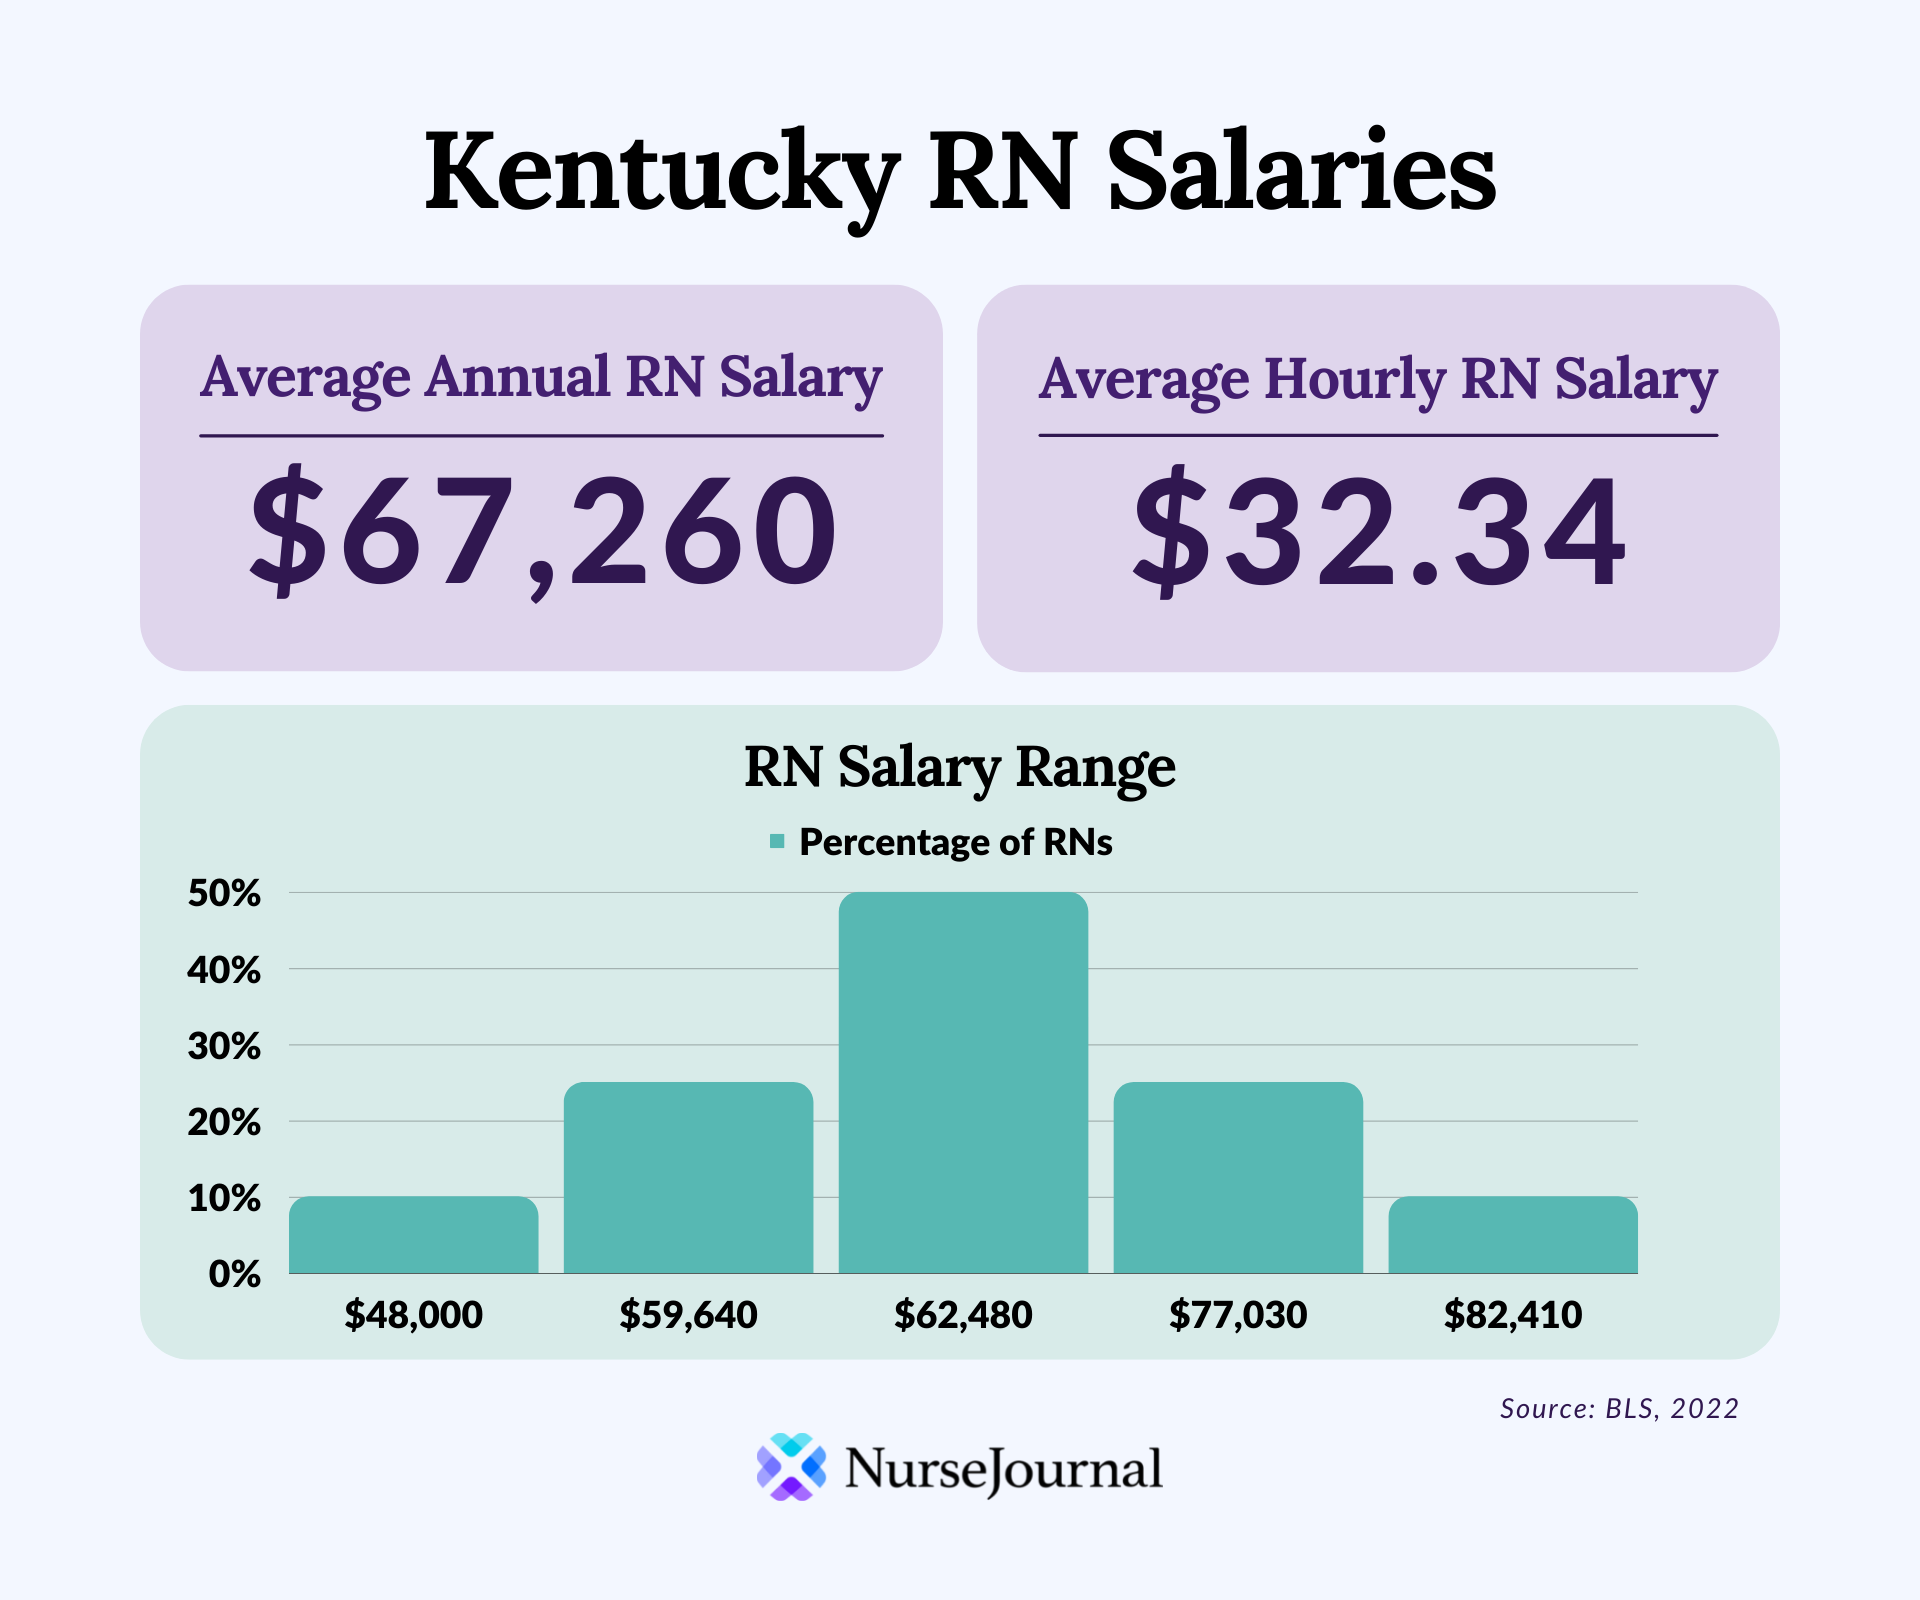 Infographic of registered nursing salary data in Kentucky. The average annual RN salary is $67,260. The average hourly RN salary is $32.34. Average RN salaries range from $48,000 among the bottom 10th percentile of earners to $82,410 among the top 90th percentile of earners.